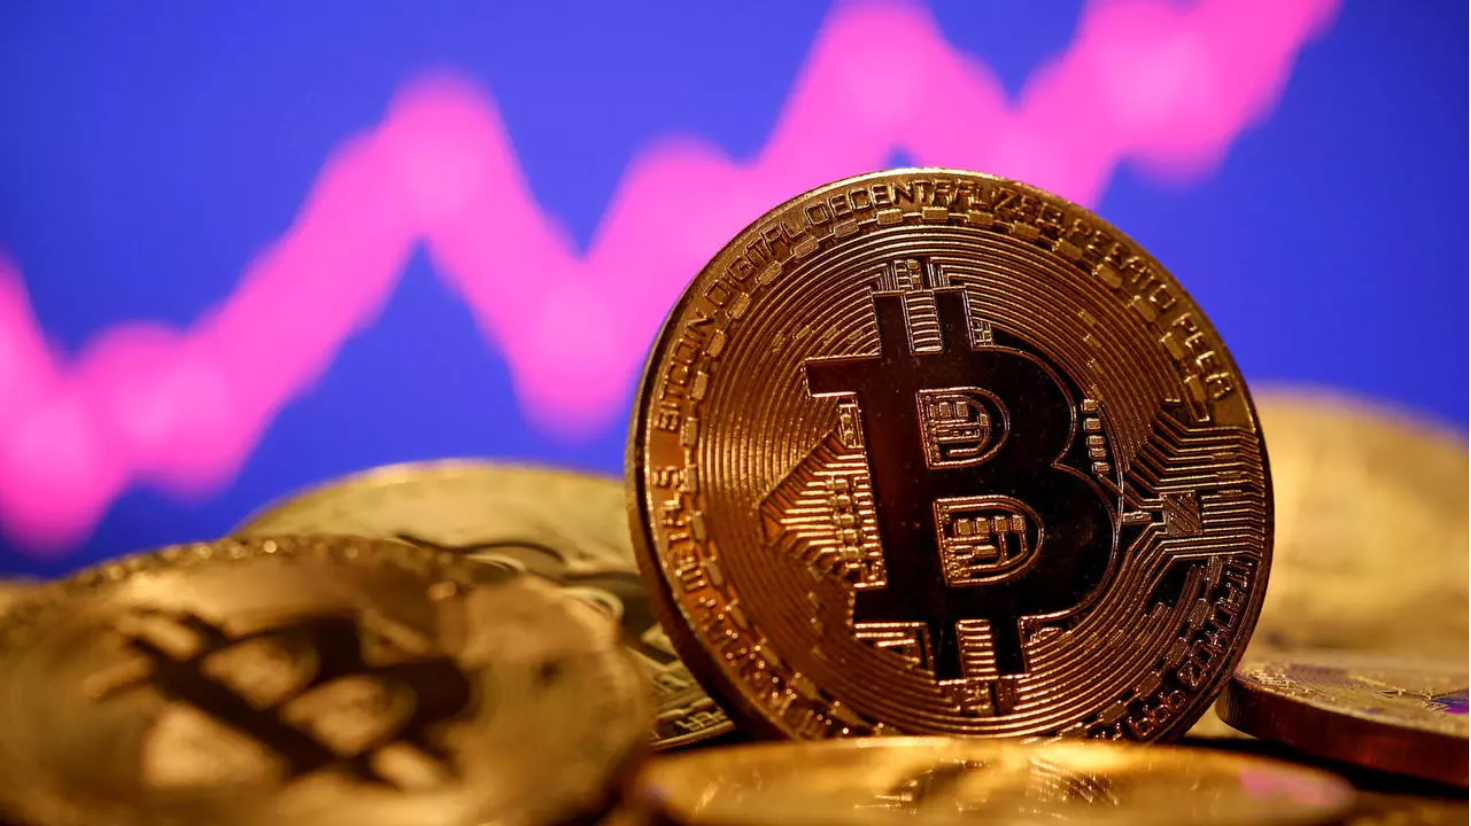 Bitcoin value surges above $50,000 for first time